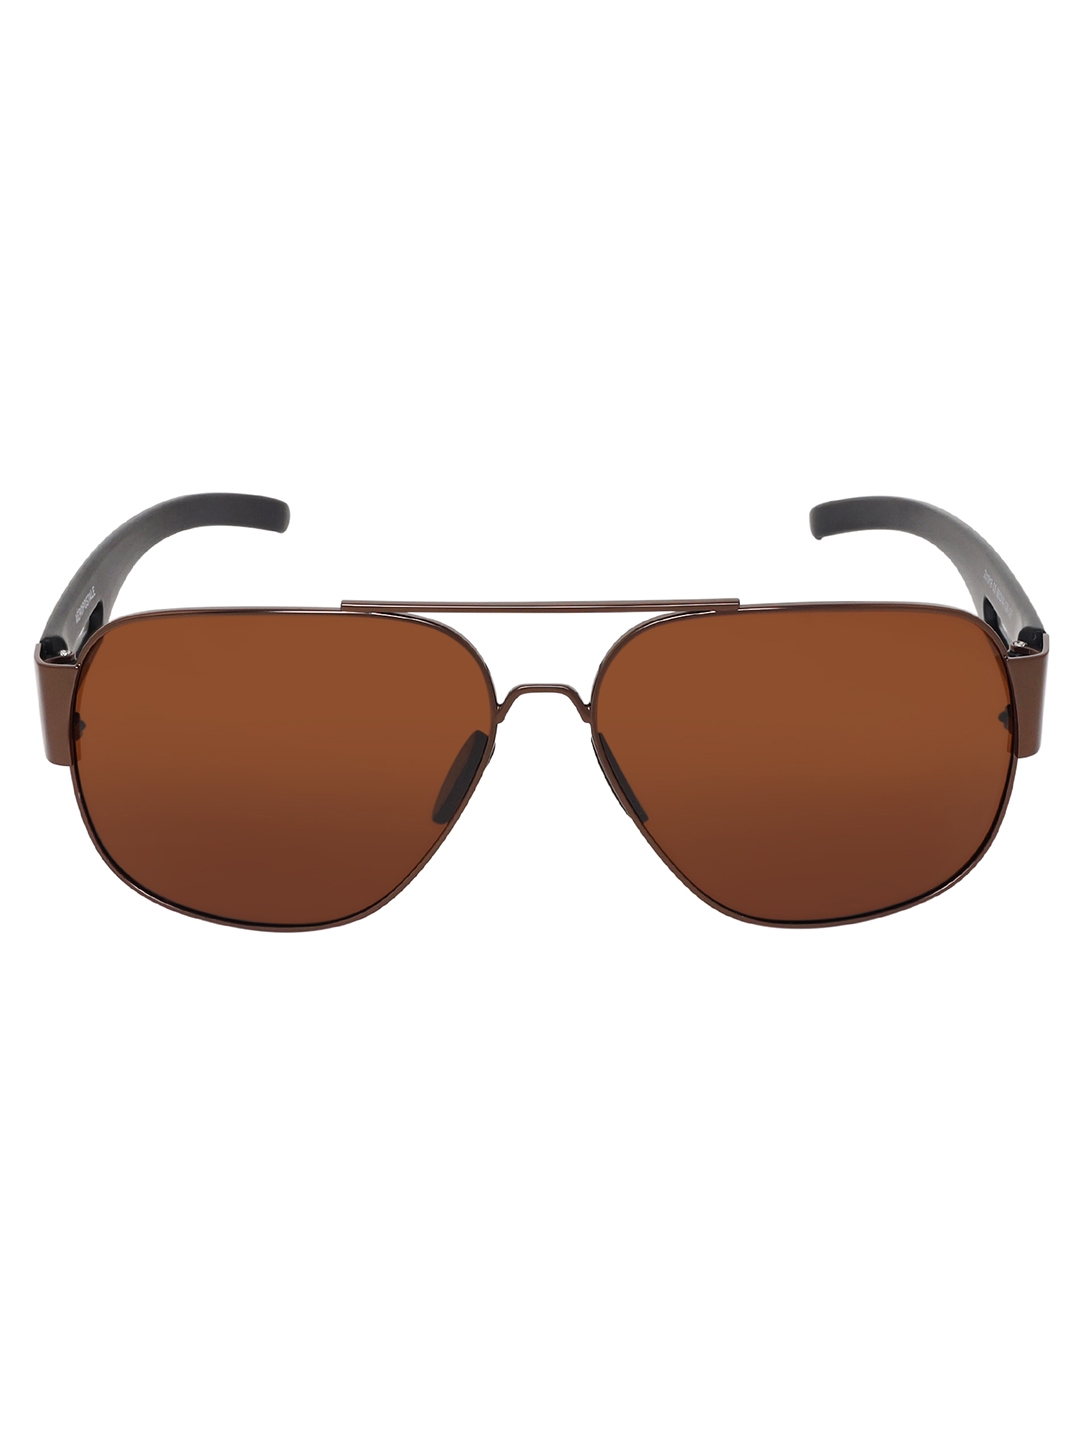 Aeropostale | Aeropostale AERO_SUN_201919_C2 Summer Sunglasses for Men comes with UV protection Polarized Anti Glare lens Mens trending Summer Style Full Brown Shaded Lens with Black Acrylic Frame. 0